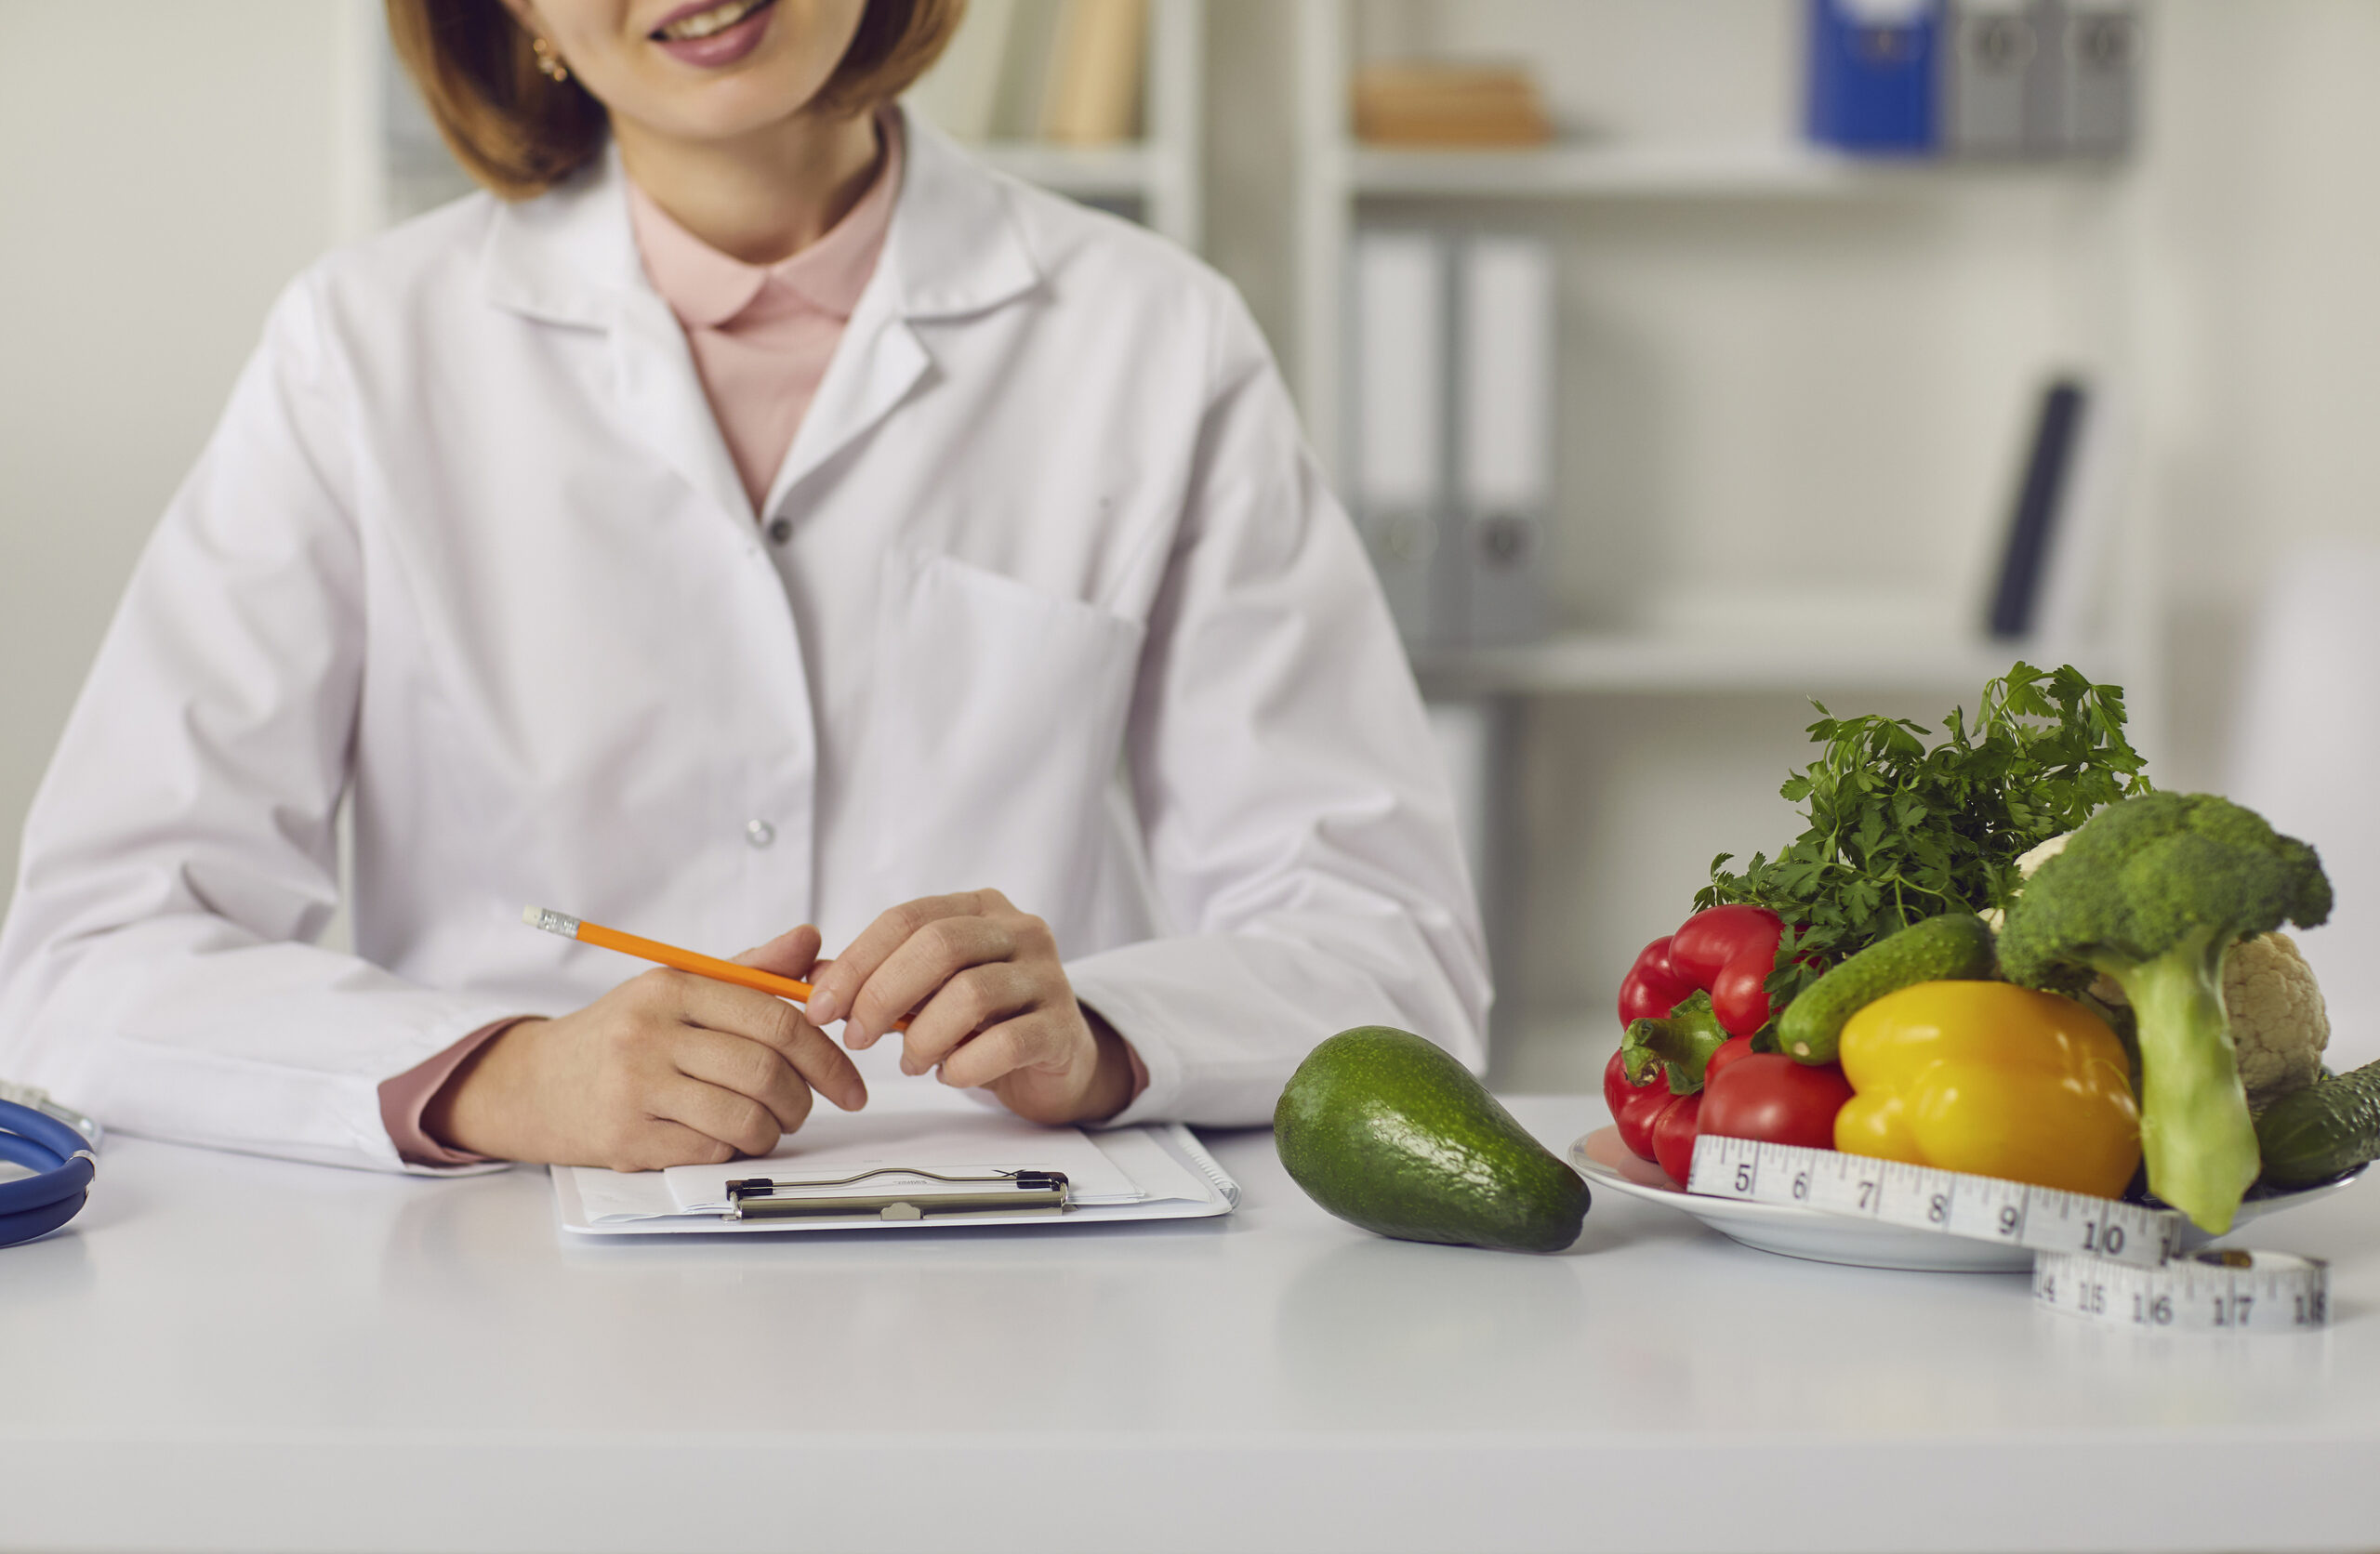 Dietitian vs Nutritionist: What Every New Patient Needs to Know